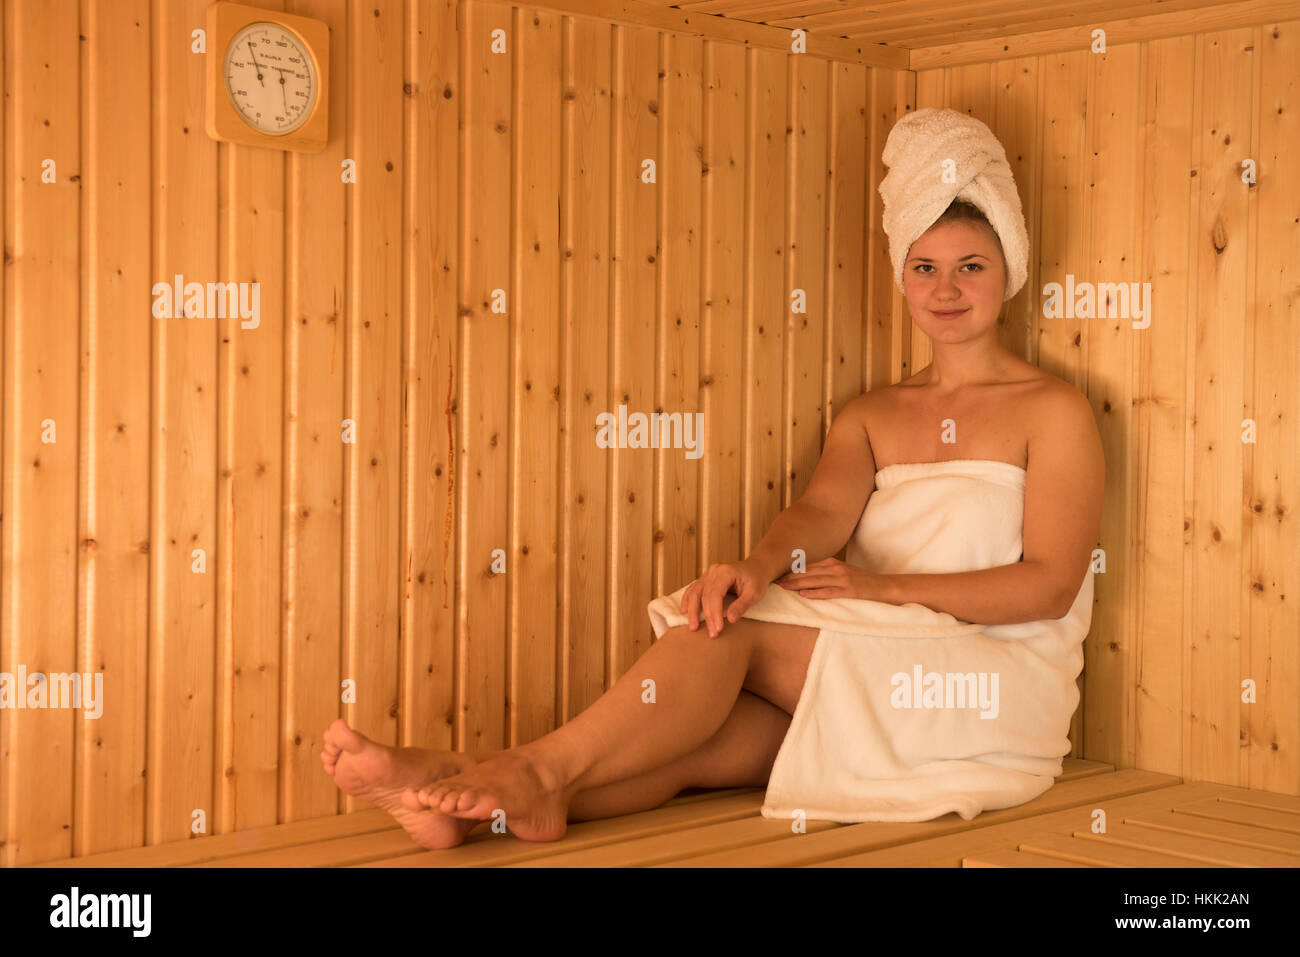 young blond woman in wooden sauna with towel on her head Stock Photo